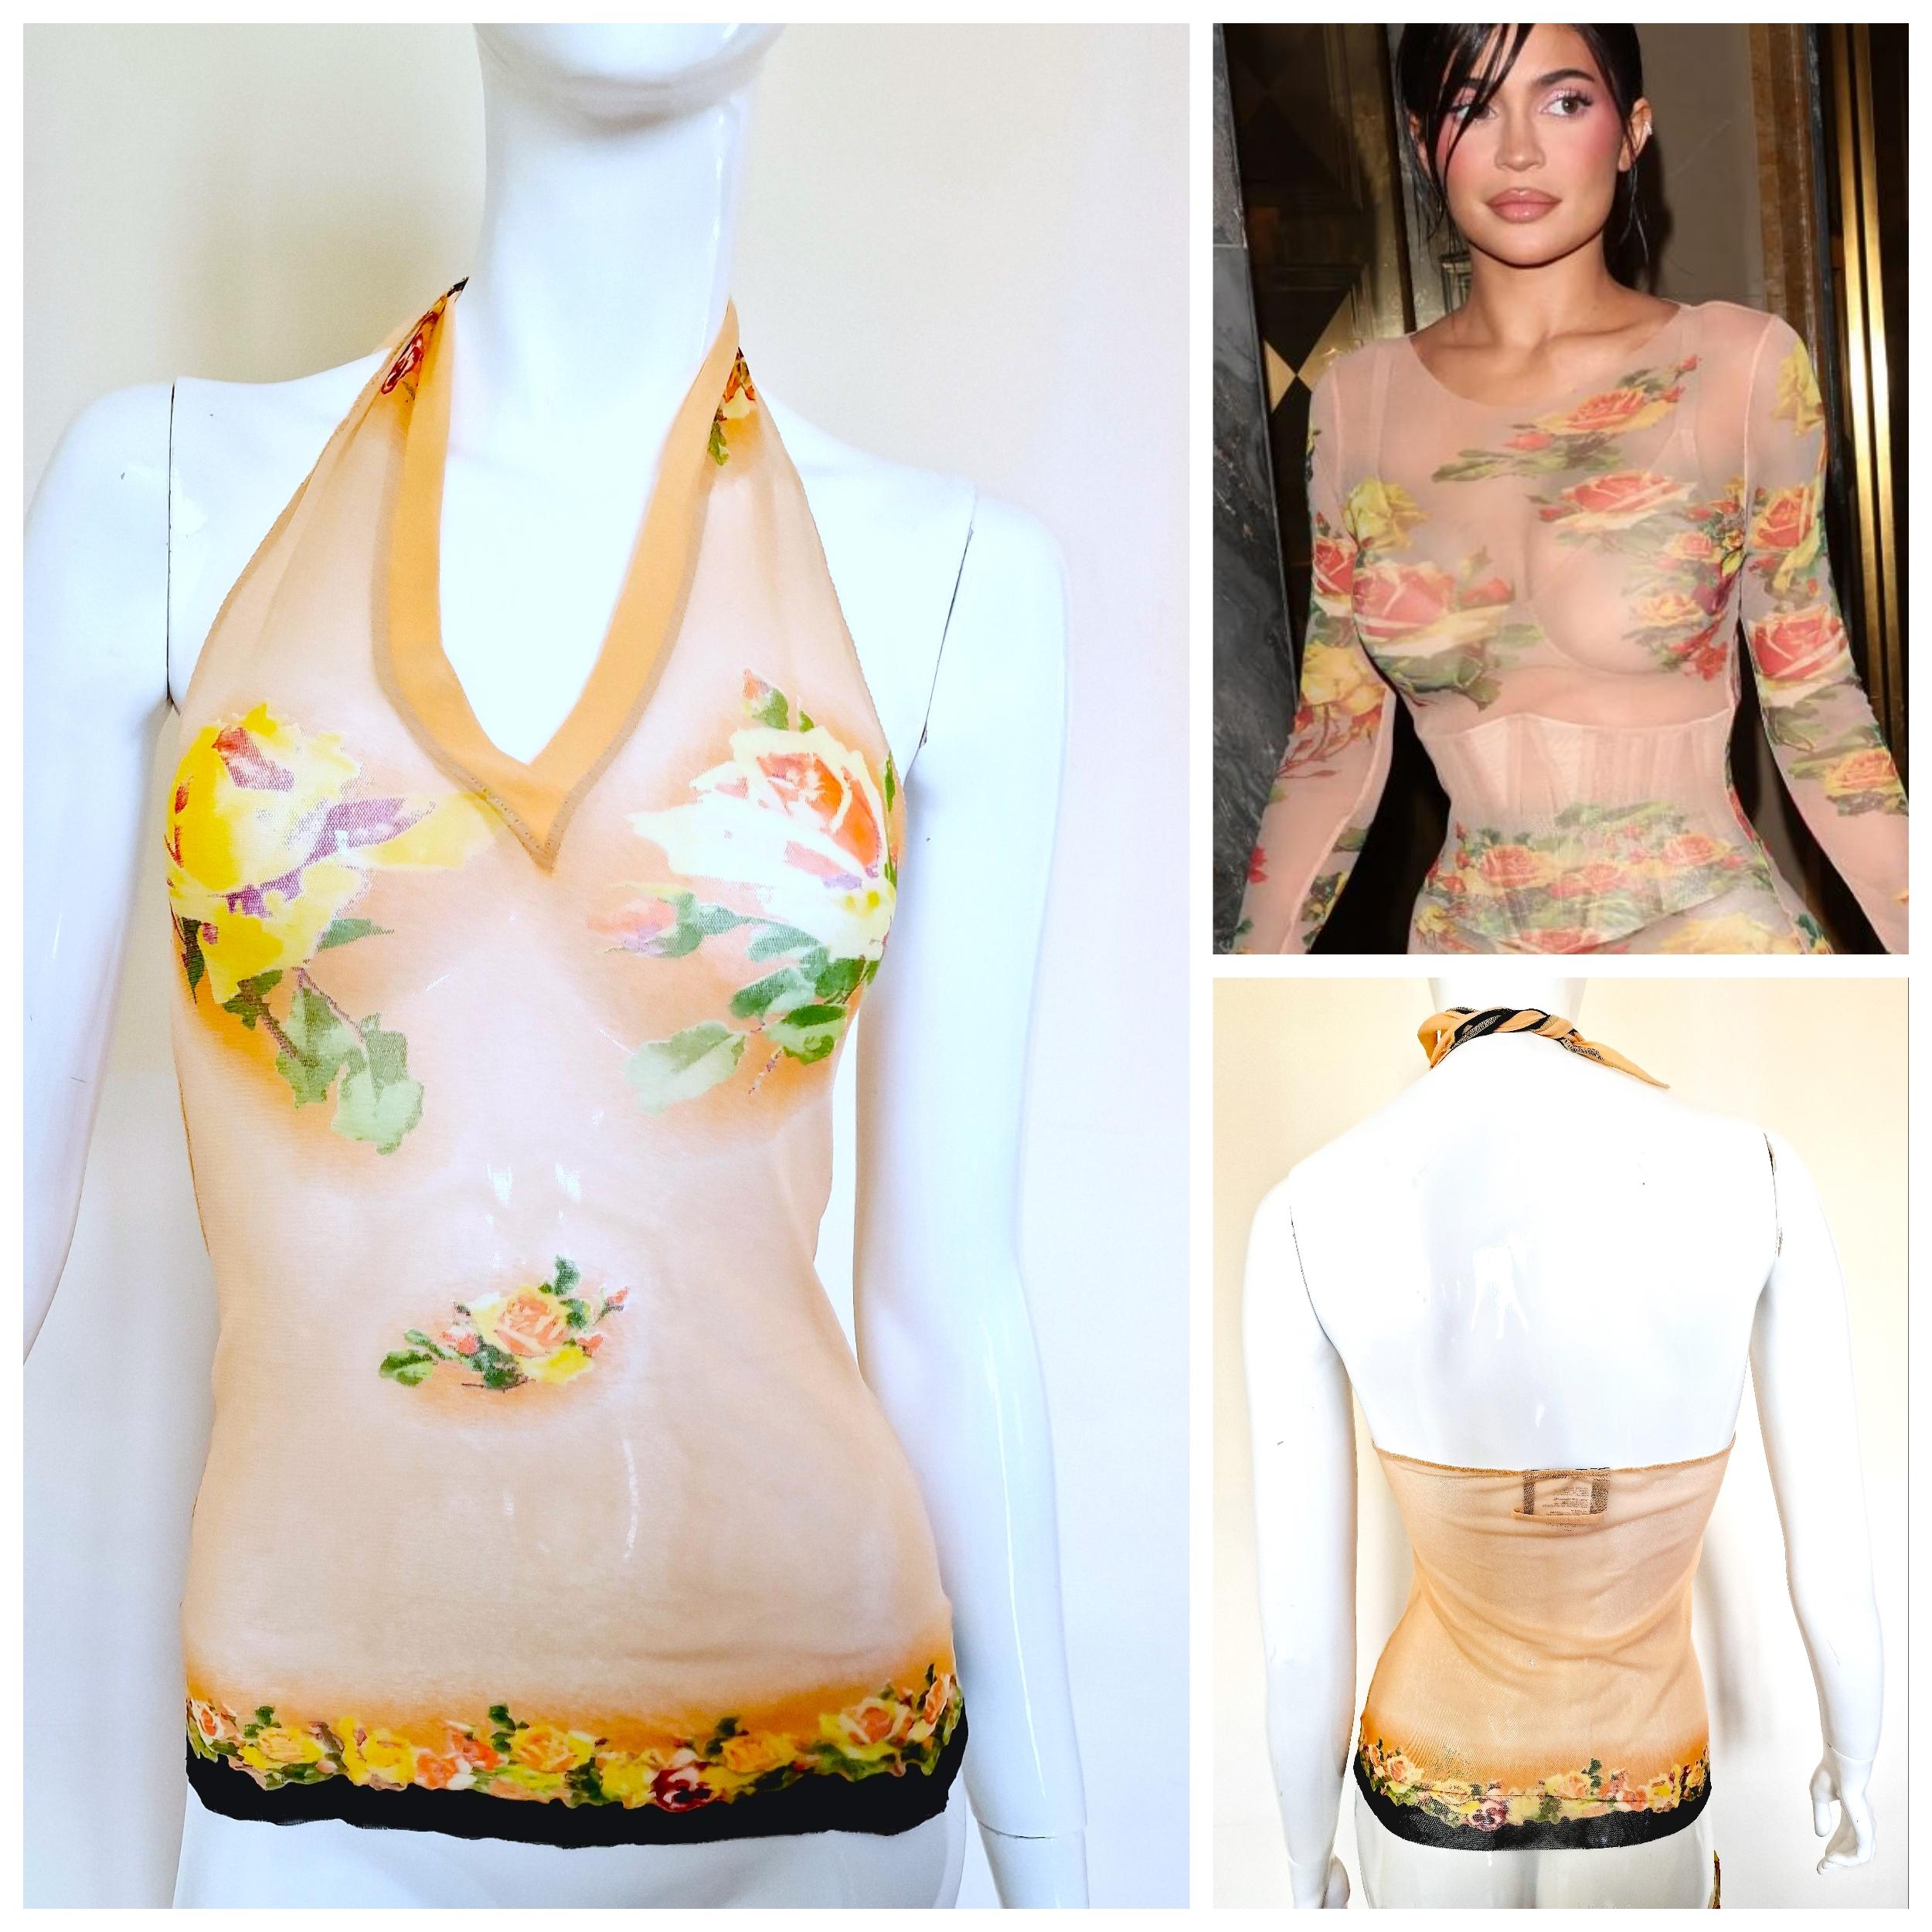 Jean Paul Gaultier Rose Kendall Kylie Jenner Mesh Transparent T-shirt Tee Top In Excellent Condition For Sale In PARIS, FR